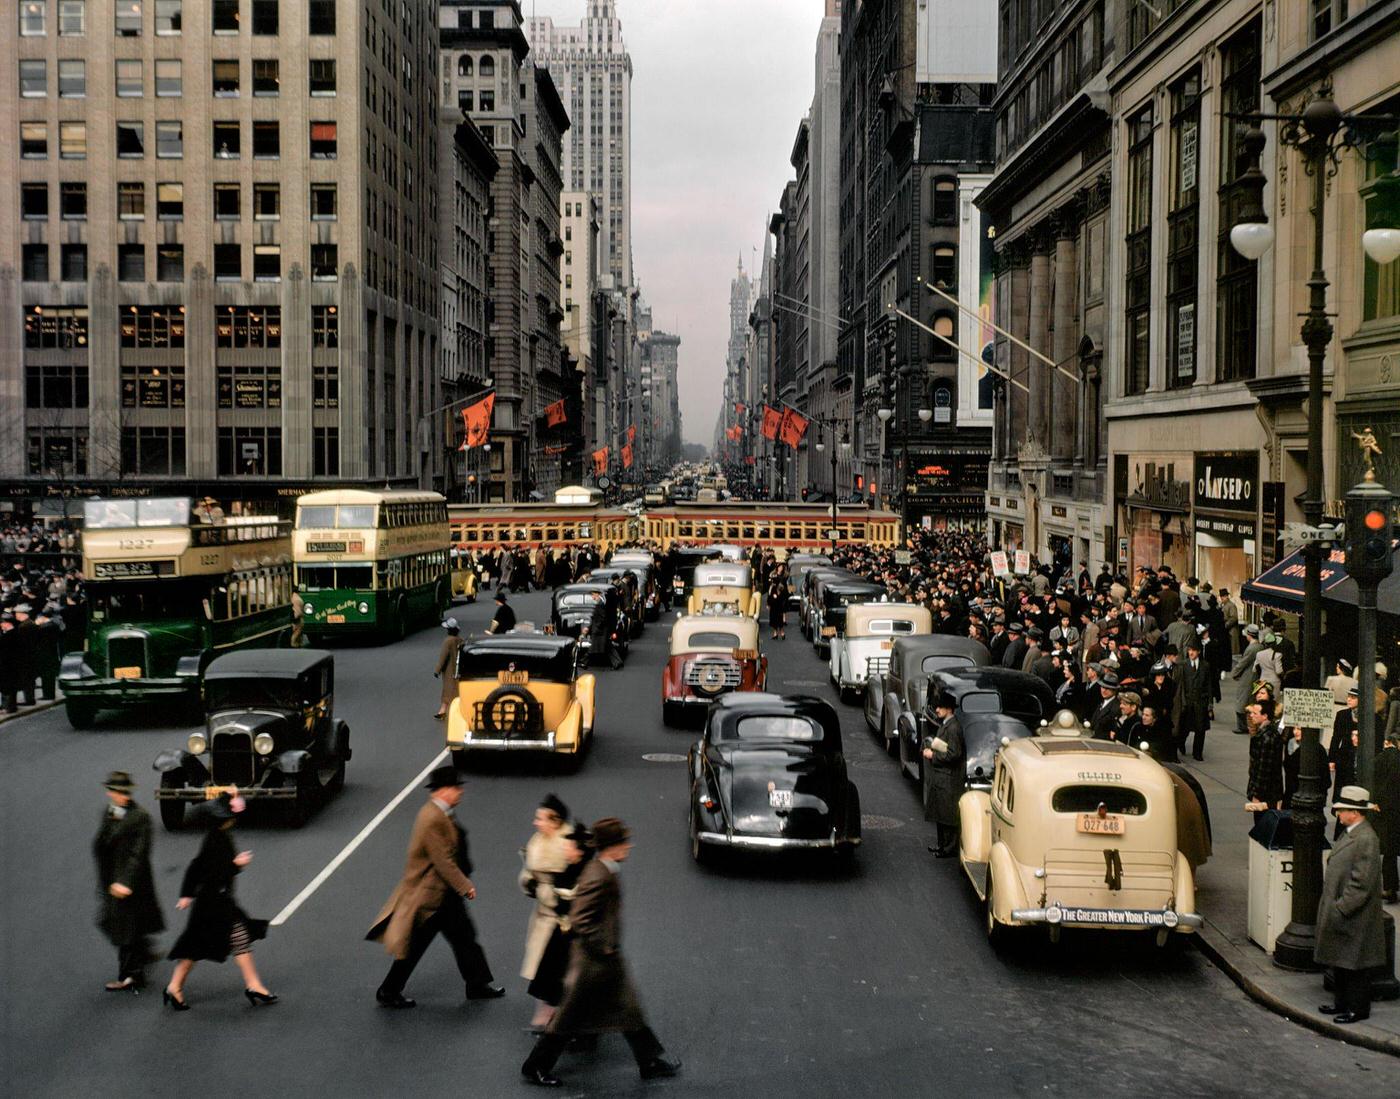 Pedestrians, Cars, Taxis, Buses, Trolley Traffic Fifth Avenue Looking North From Below 42Nd Street, Manhattan, 1940S